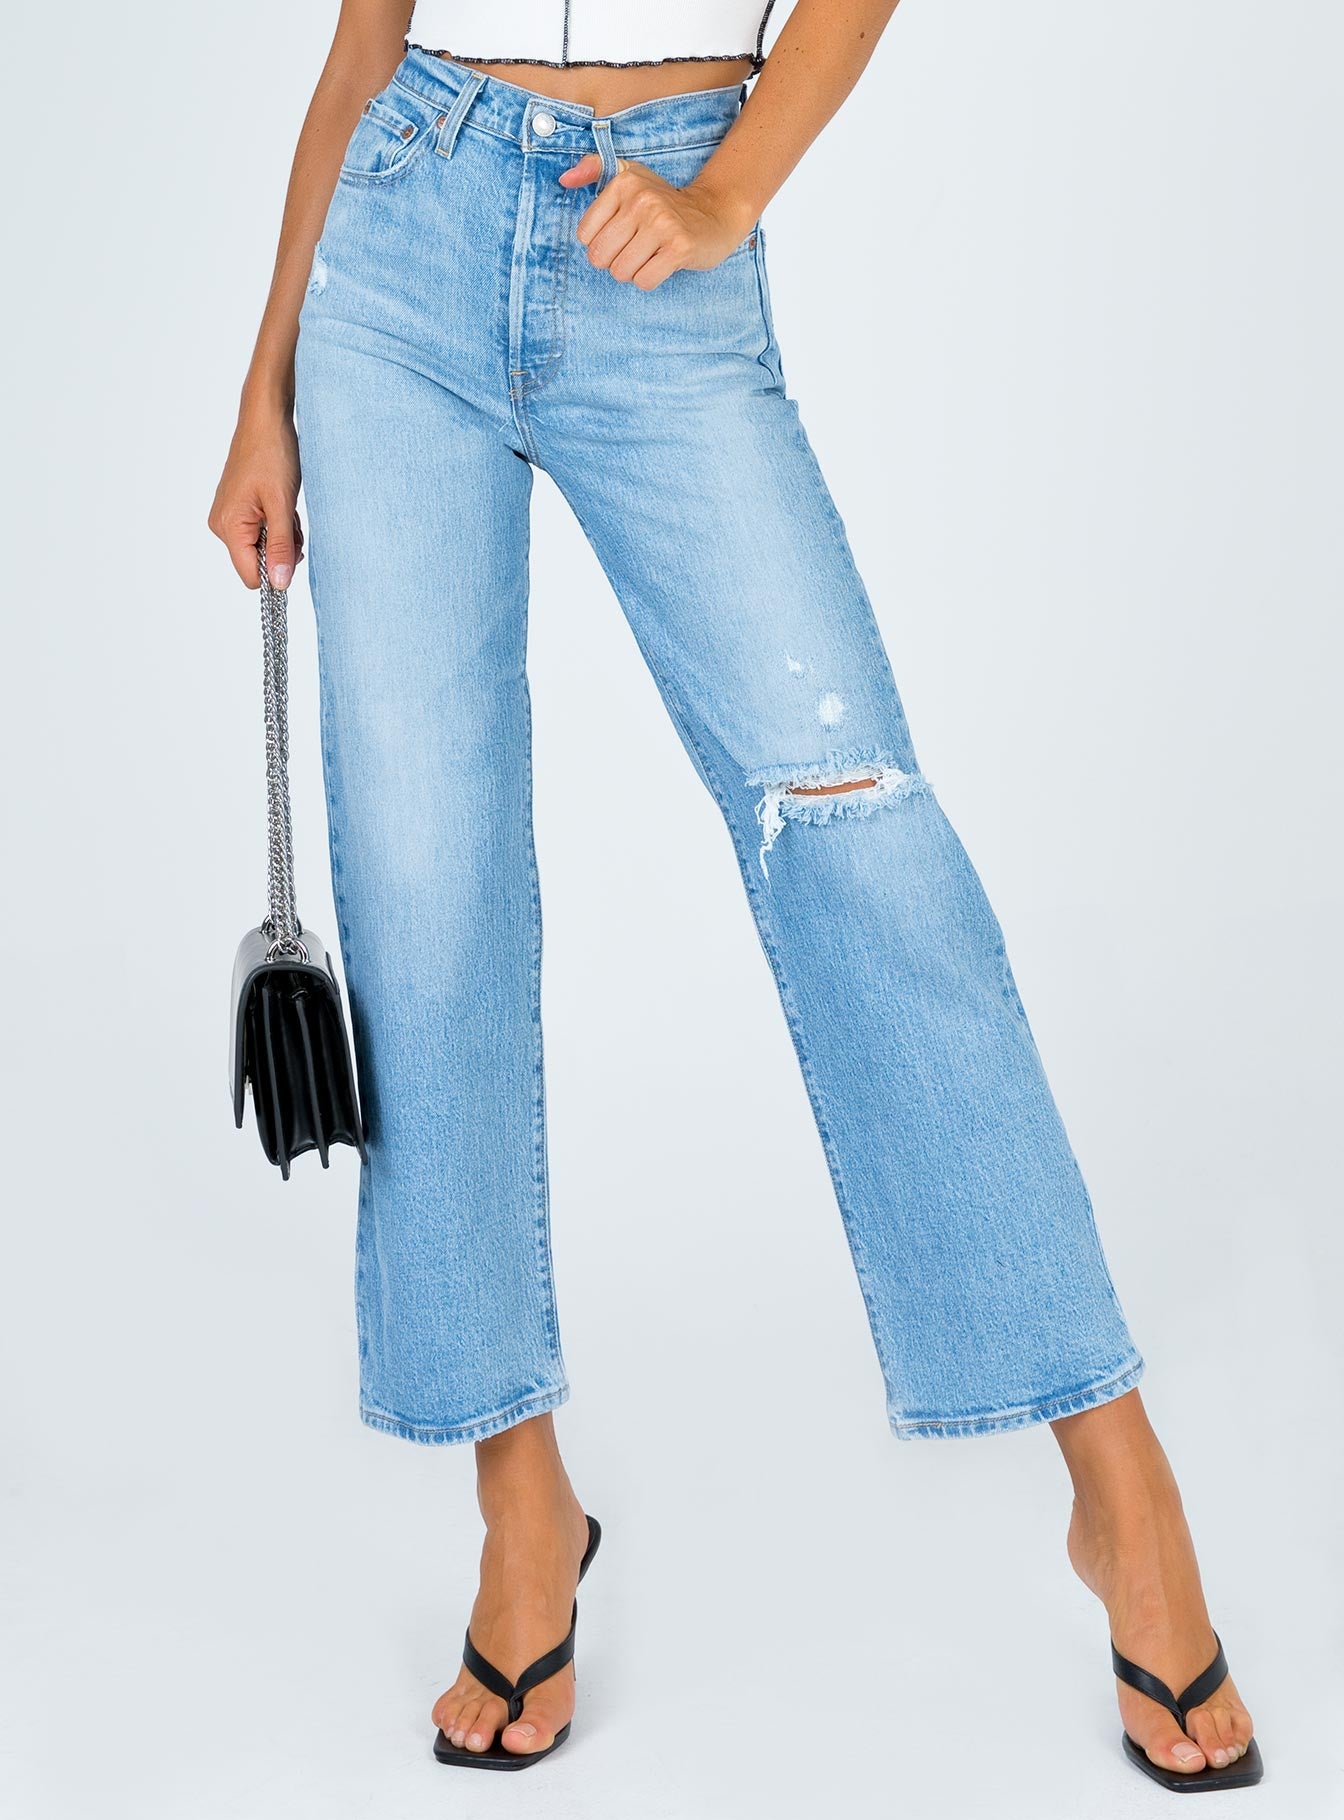 levi's ankle jeans